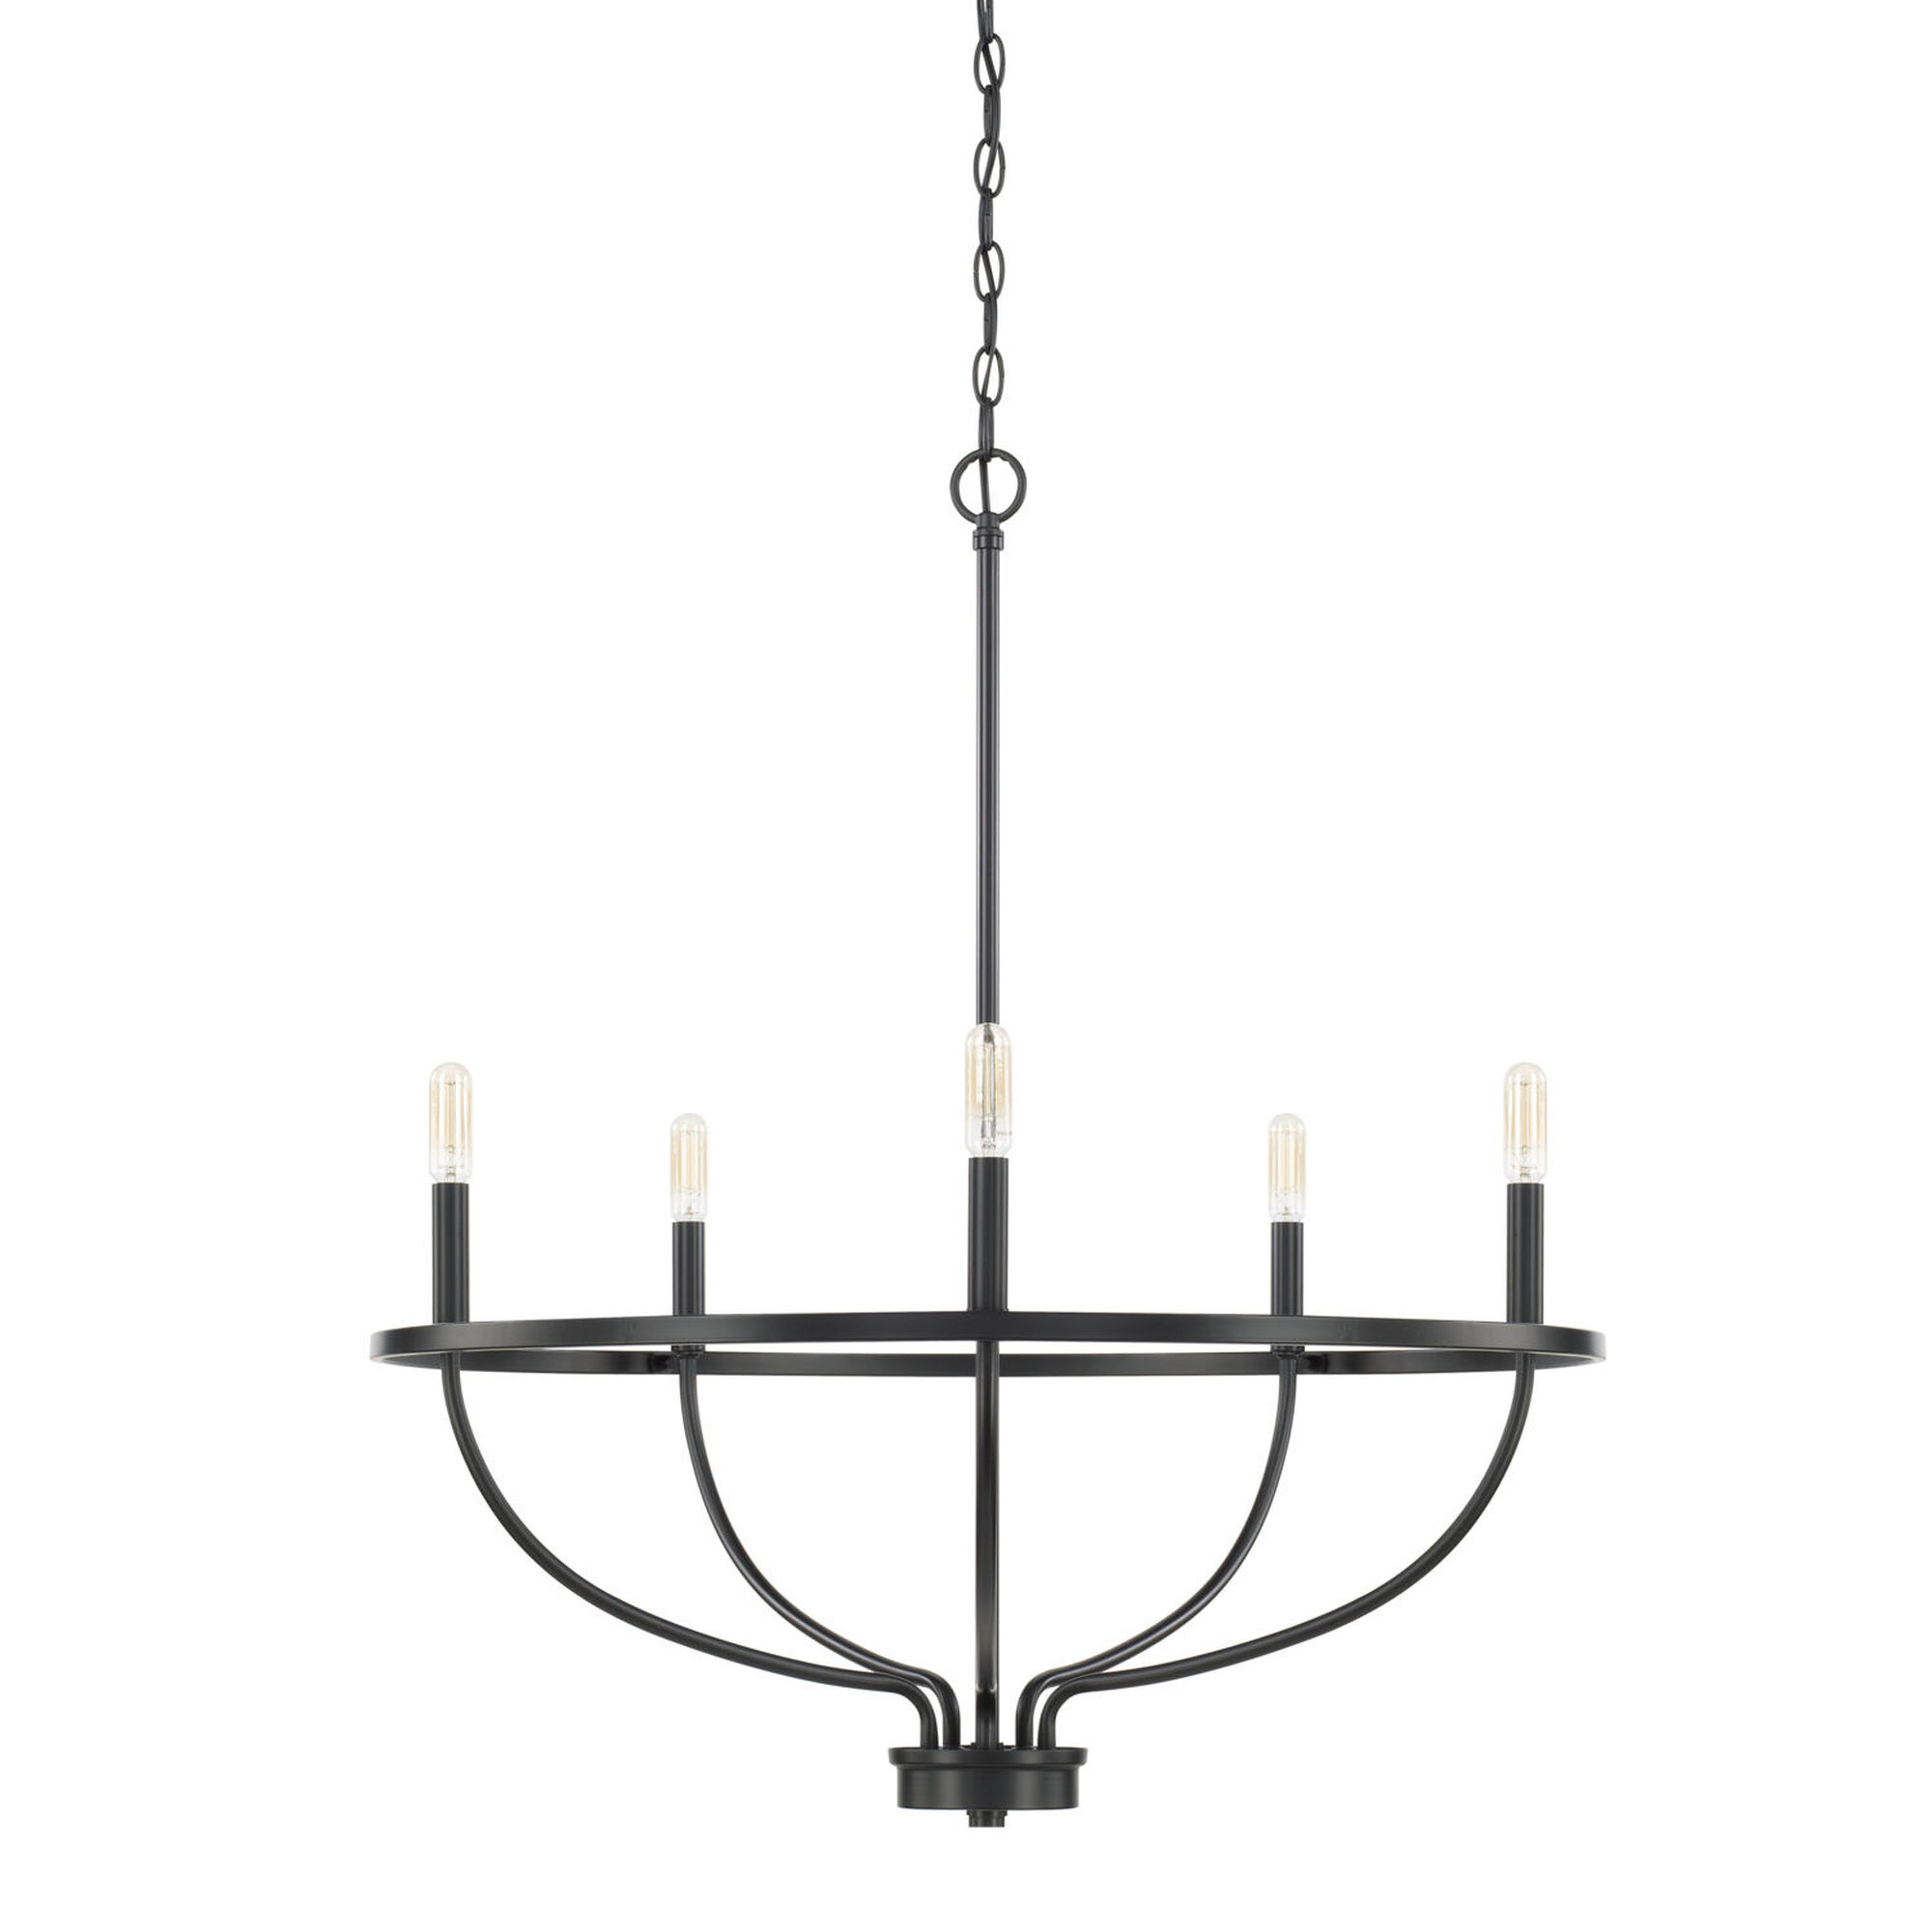 Shop HomePlace Greyson Matte Black 29-Inch Five-Light Chandelier from Bellacor on Openhaus